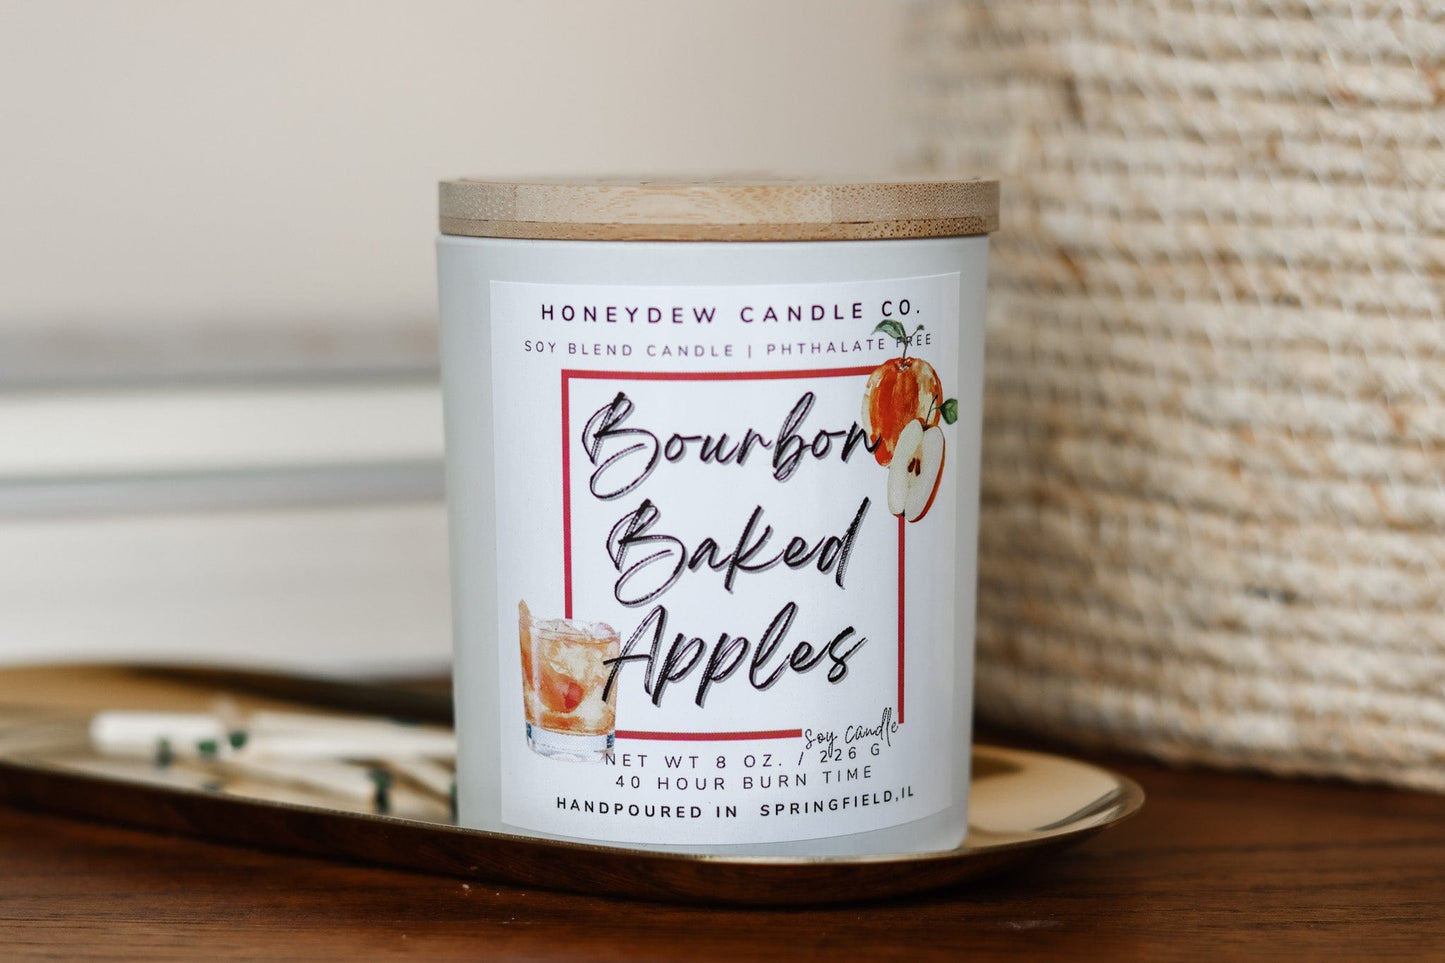 Bourbon Baked Apples Candle 8 oz